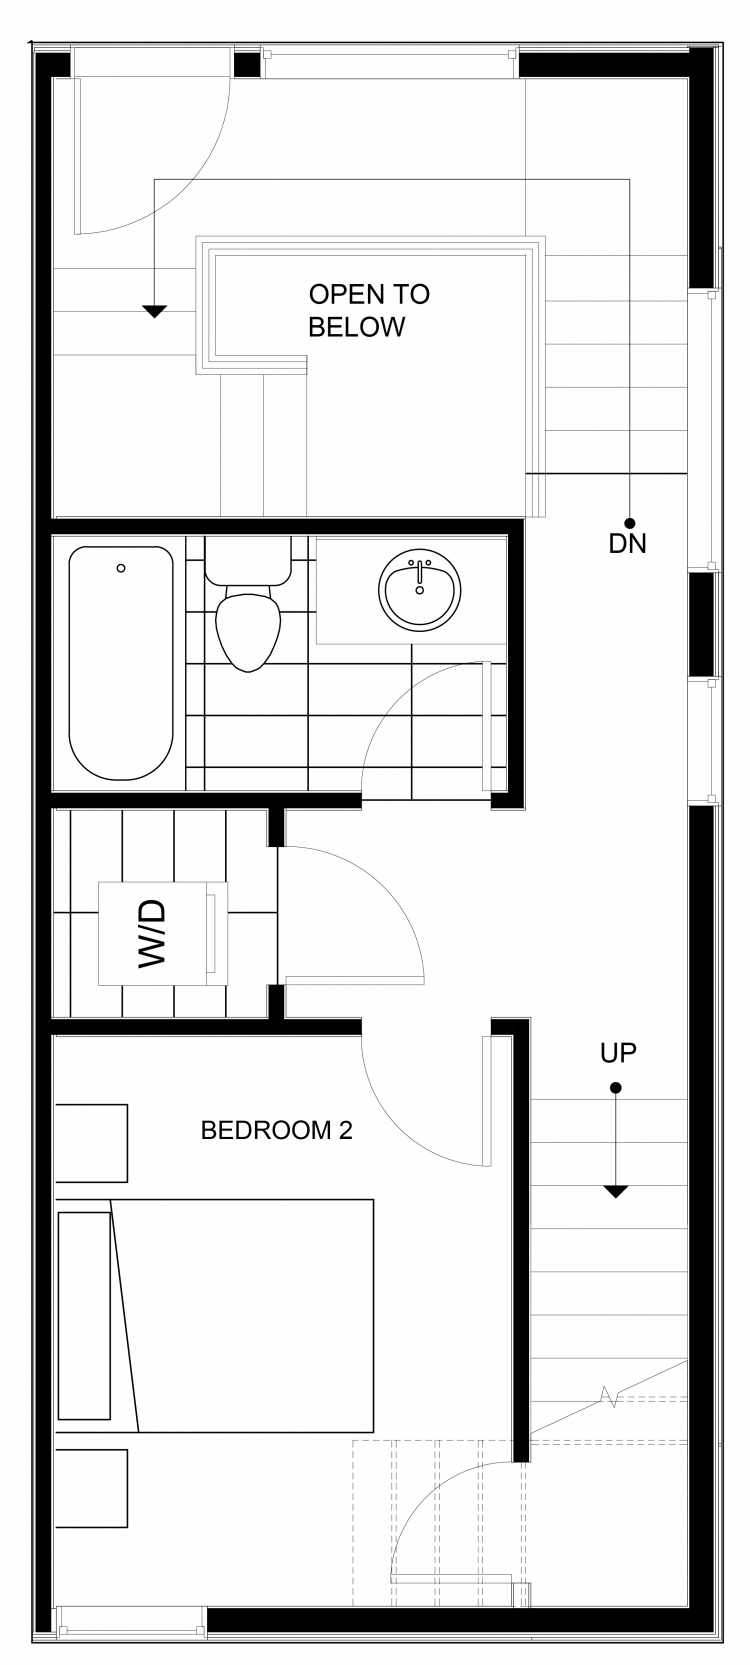 Second Floor Plan of 1539 Grandview Pl E, One of the Larrabee Townhomes in Capitol Hill